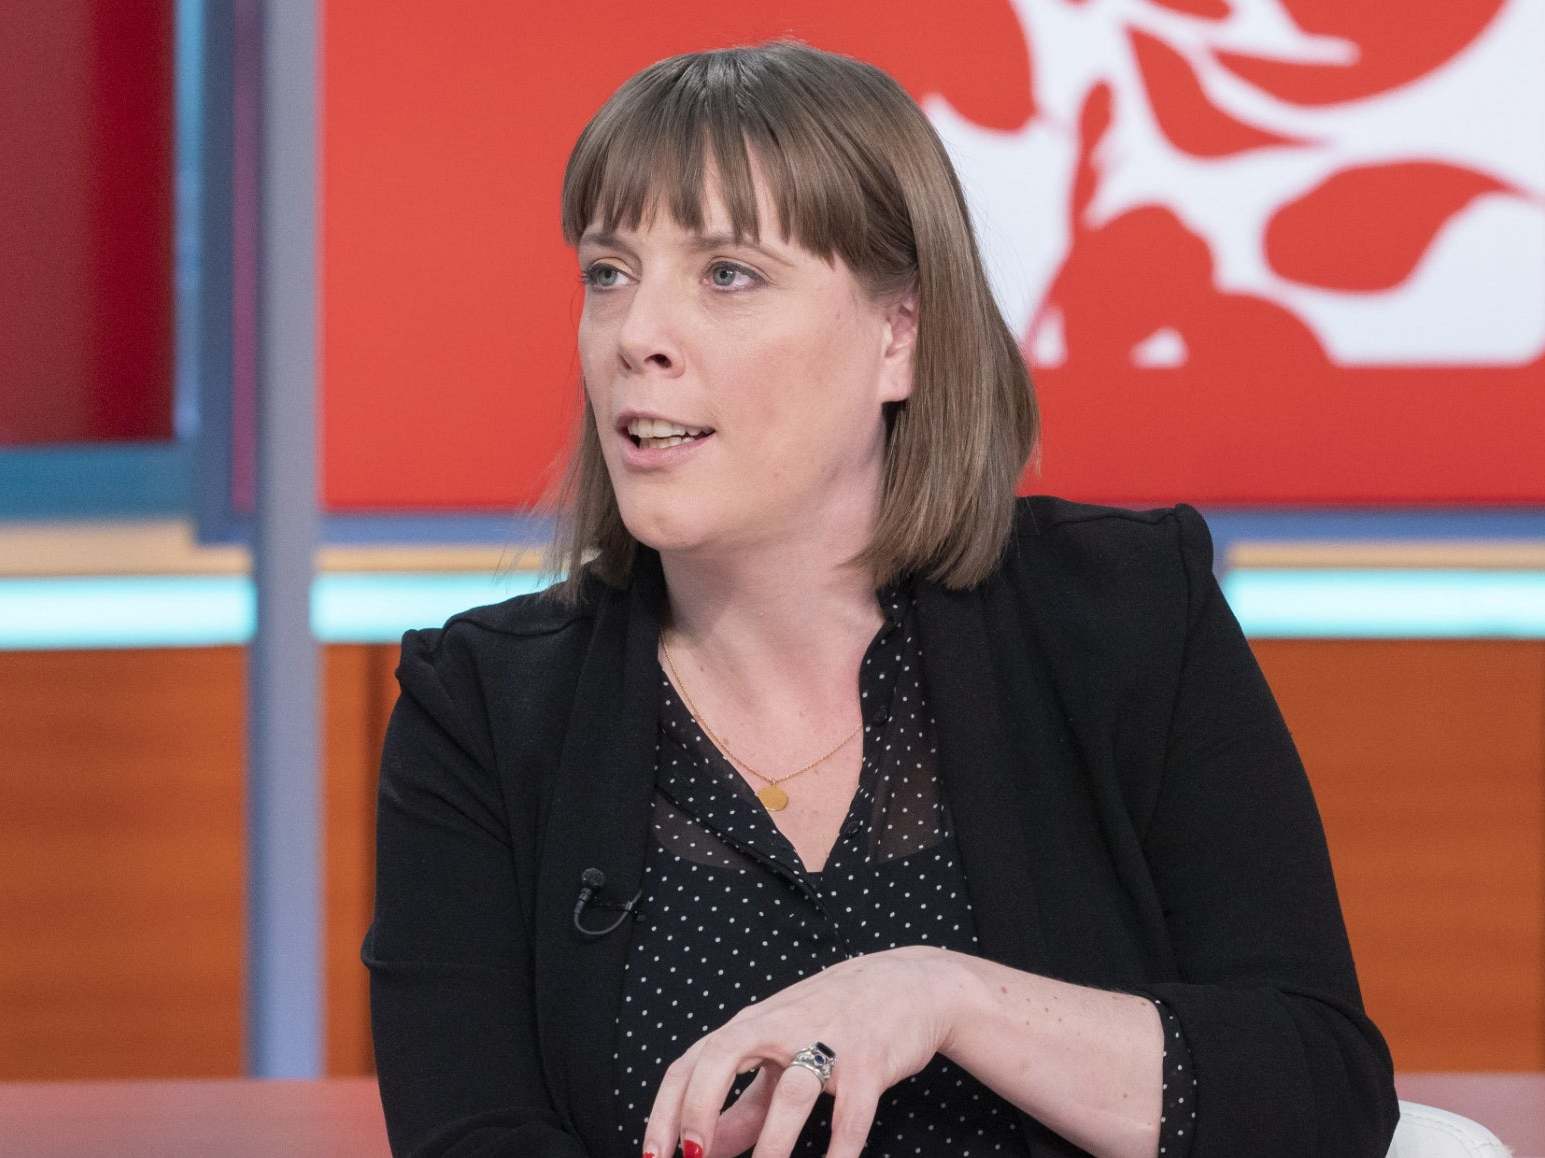 Malik was already serving time at HMP Birmingham for attempted murder when he threatened to kill and rape Jess Phillips (pictured) and Rosie Cooper